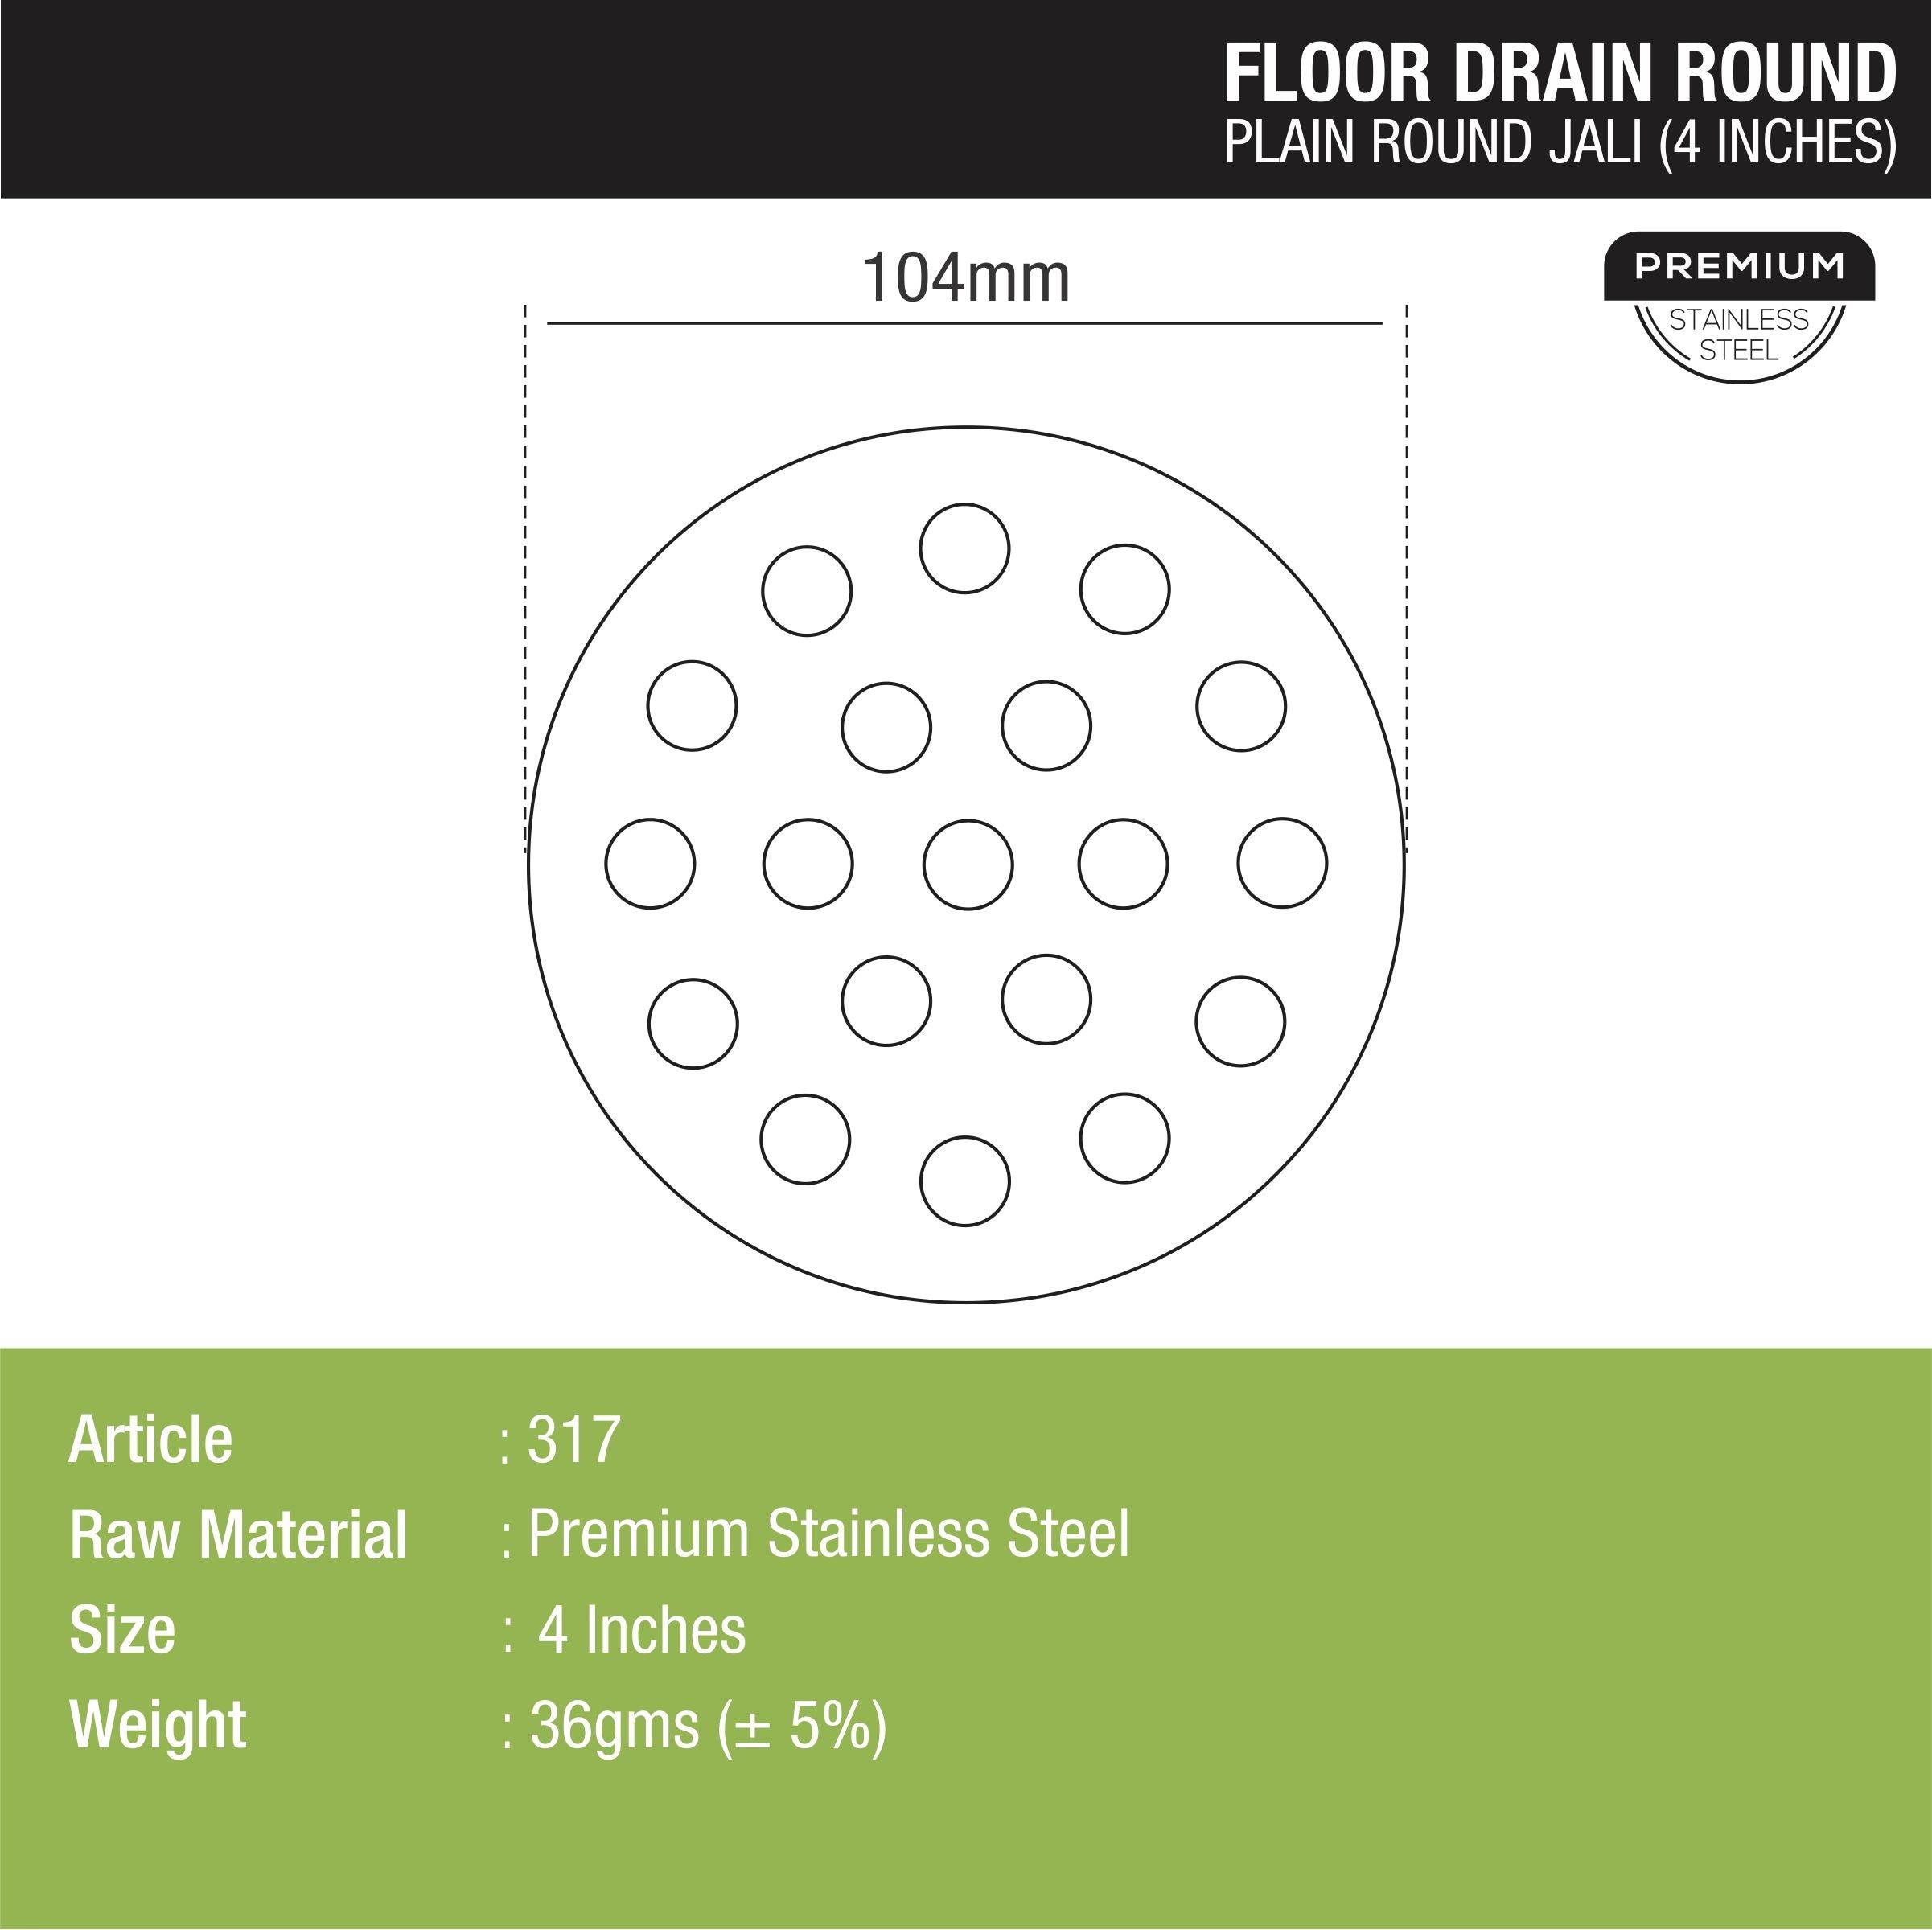 Plain Round Jali Floor Drain (4 inches) dimensions and sizes